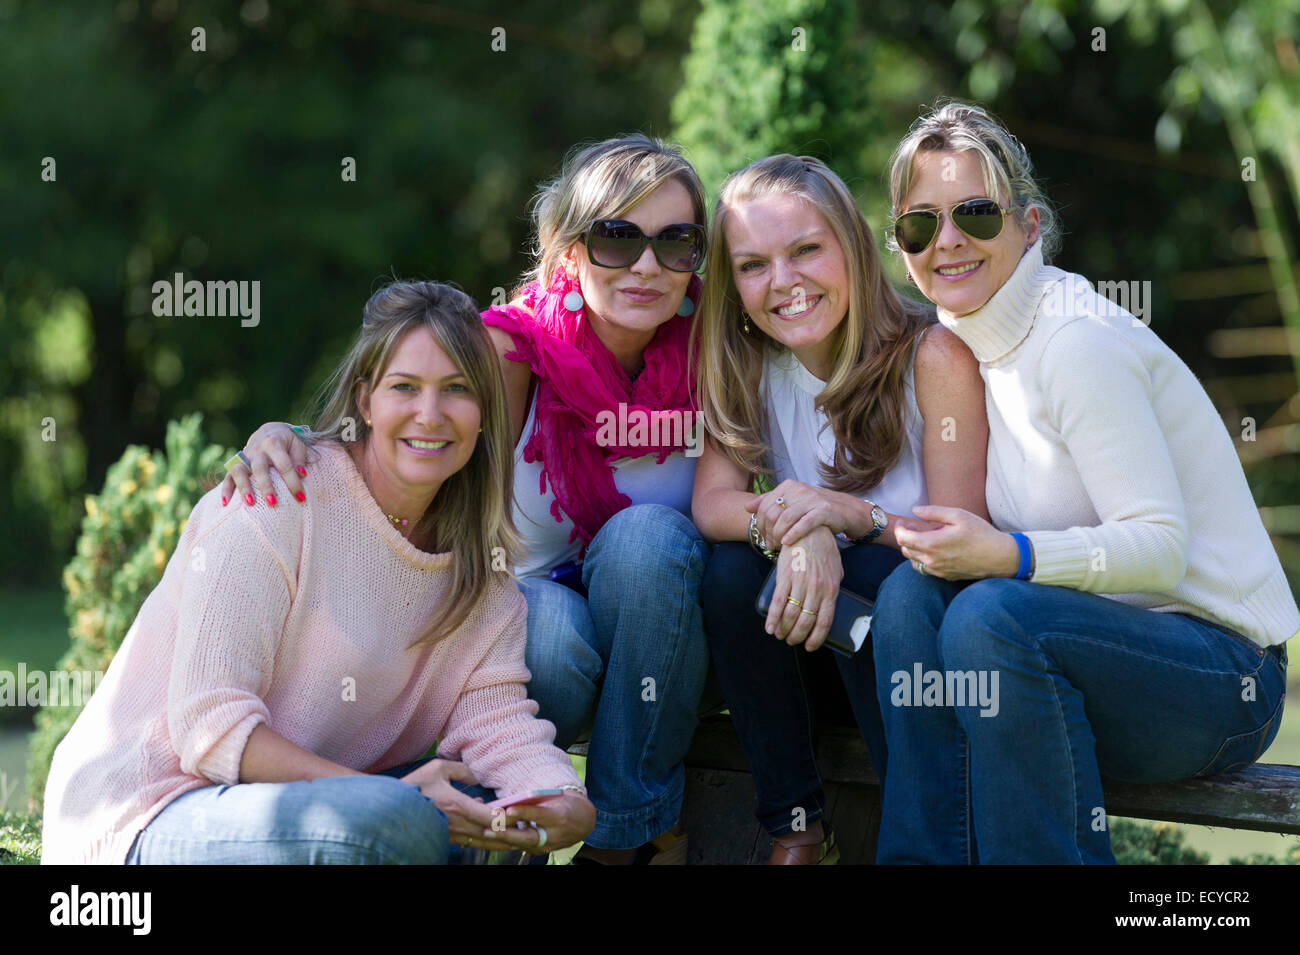 Smiling friends posing outdoors Stock Photo